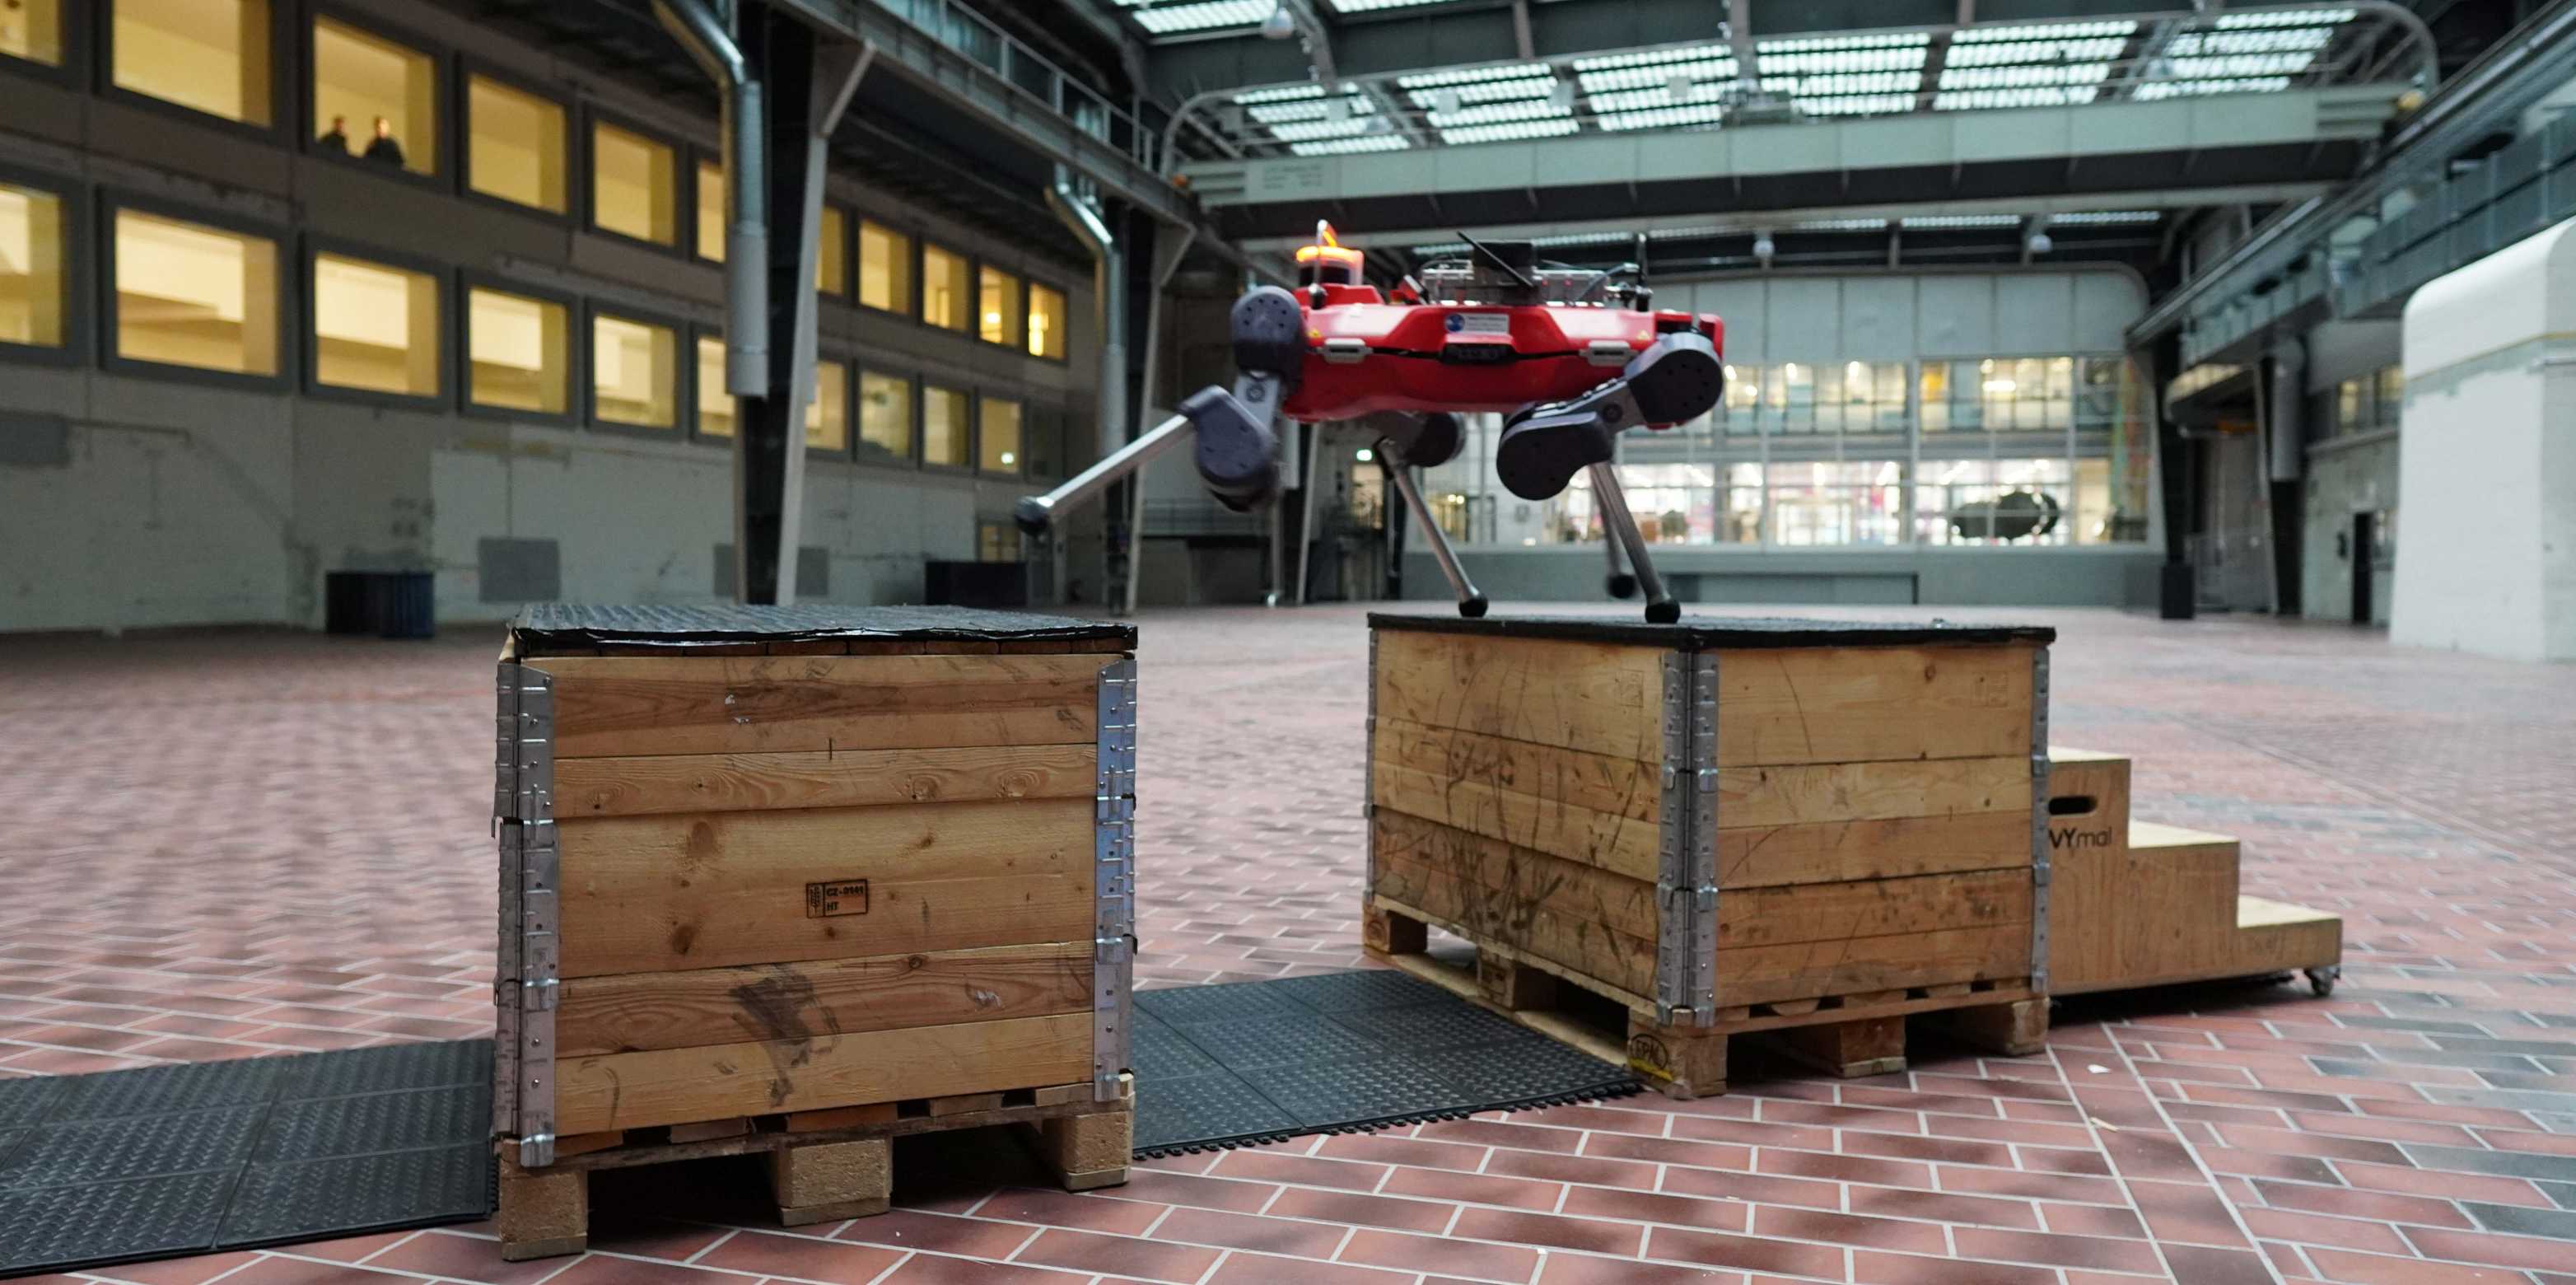 The four-legged robot steps over a gap between two wooden boxes.